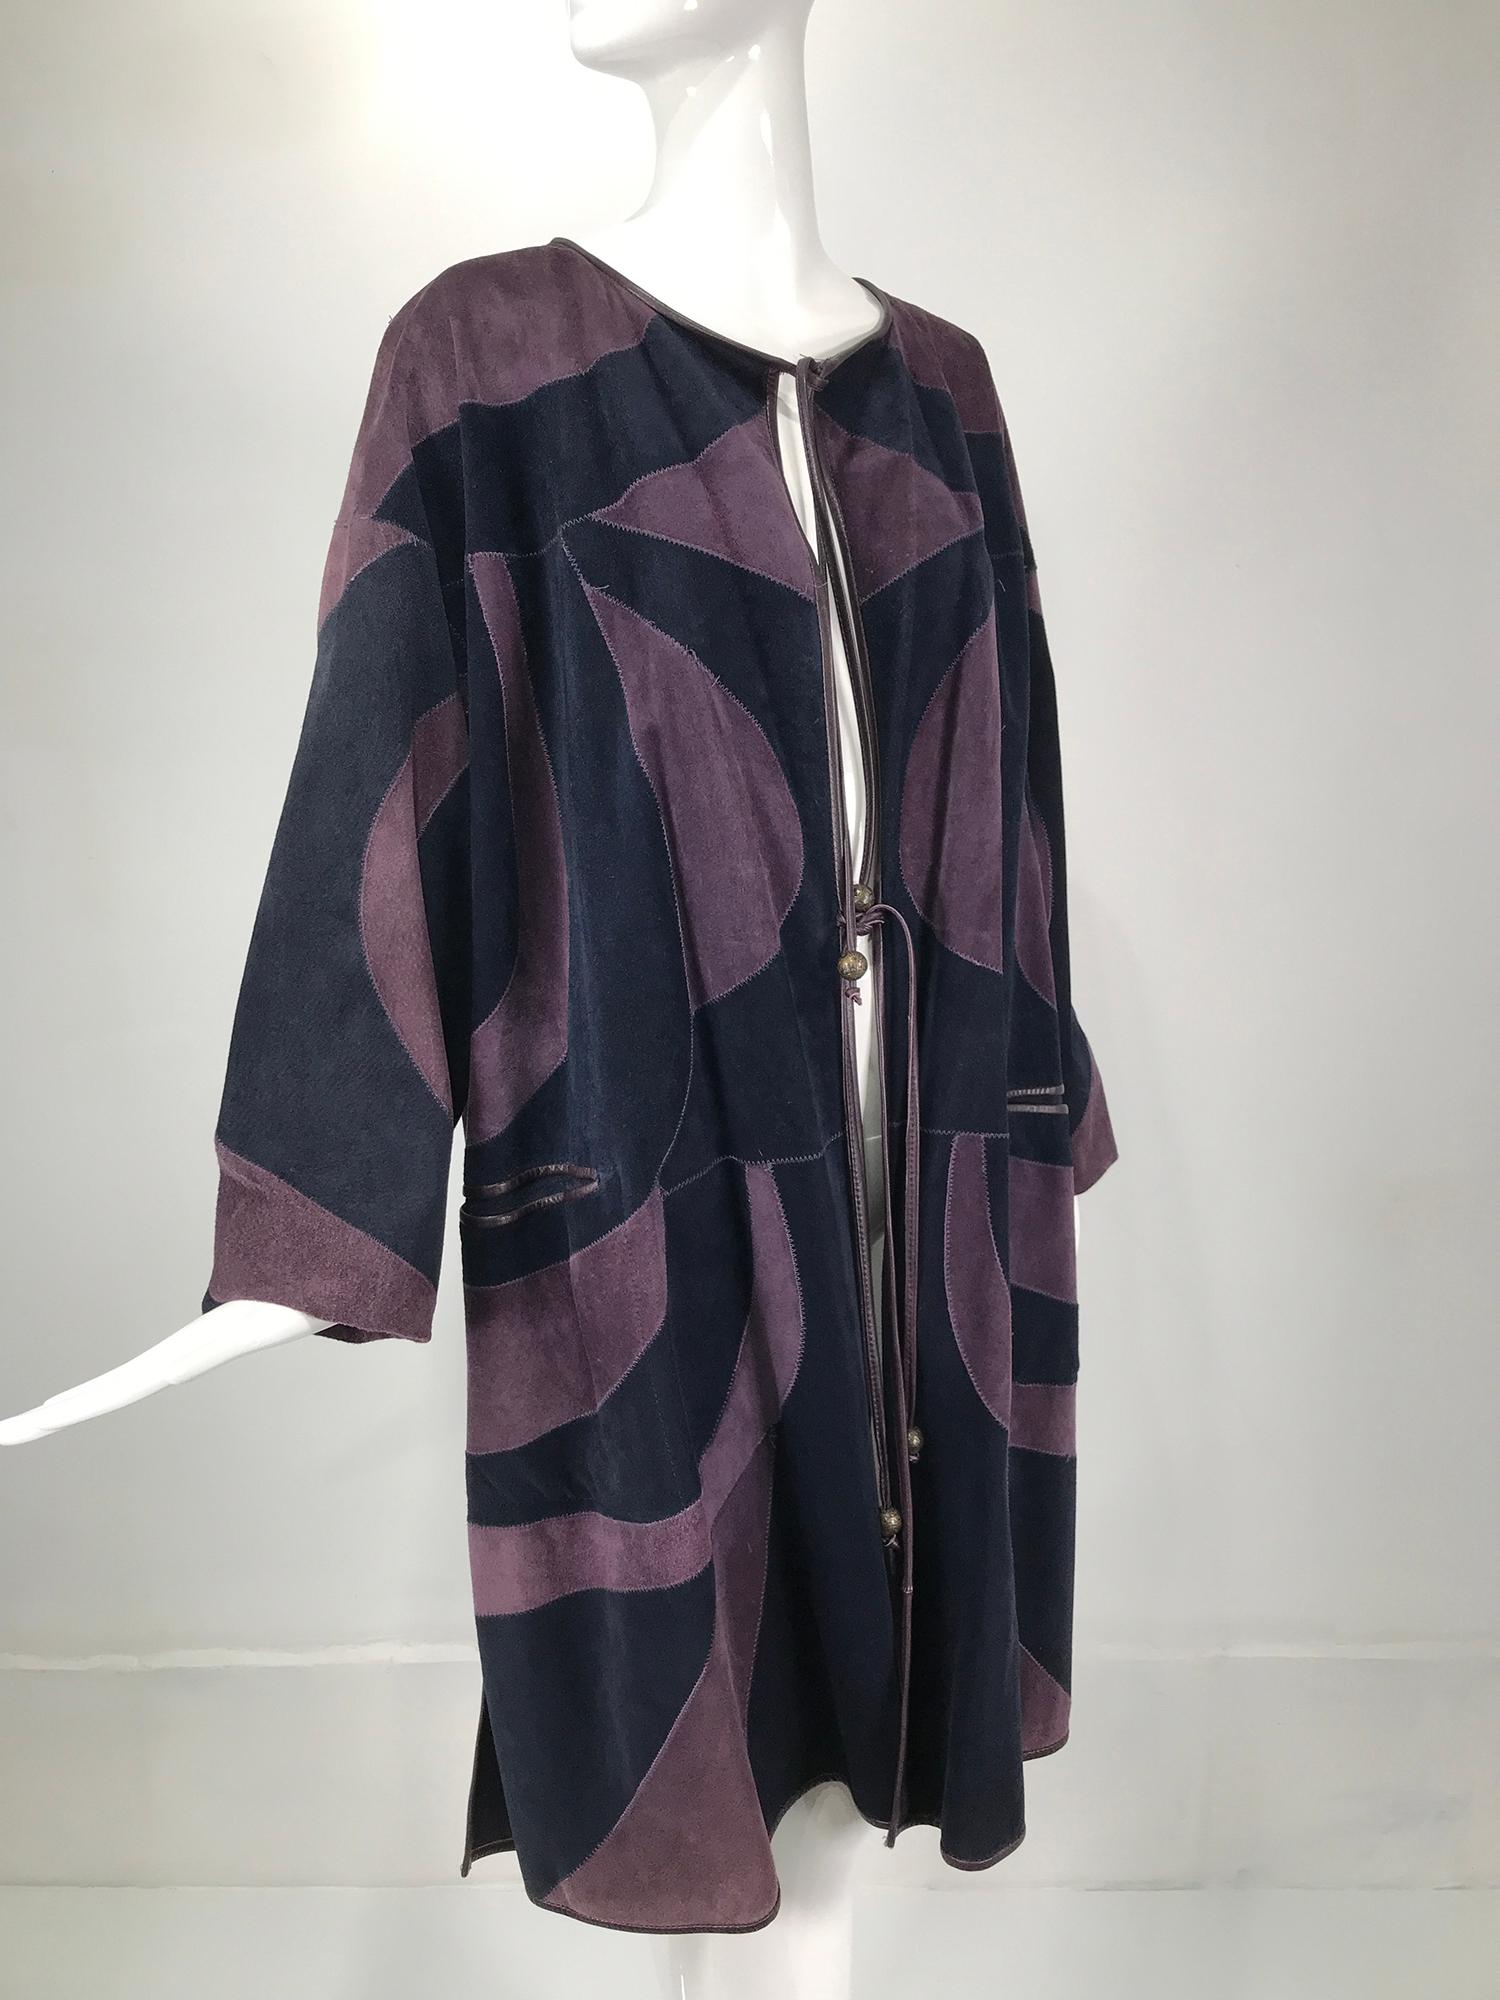 Vintage patchwork suede coat in purple & navy, made in Finland. Open front coat closes with long leather ties at the neck and waist each tie has a silver metallic geometric design bead at the end. The coat facings are trimmed purple leather welt.